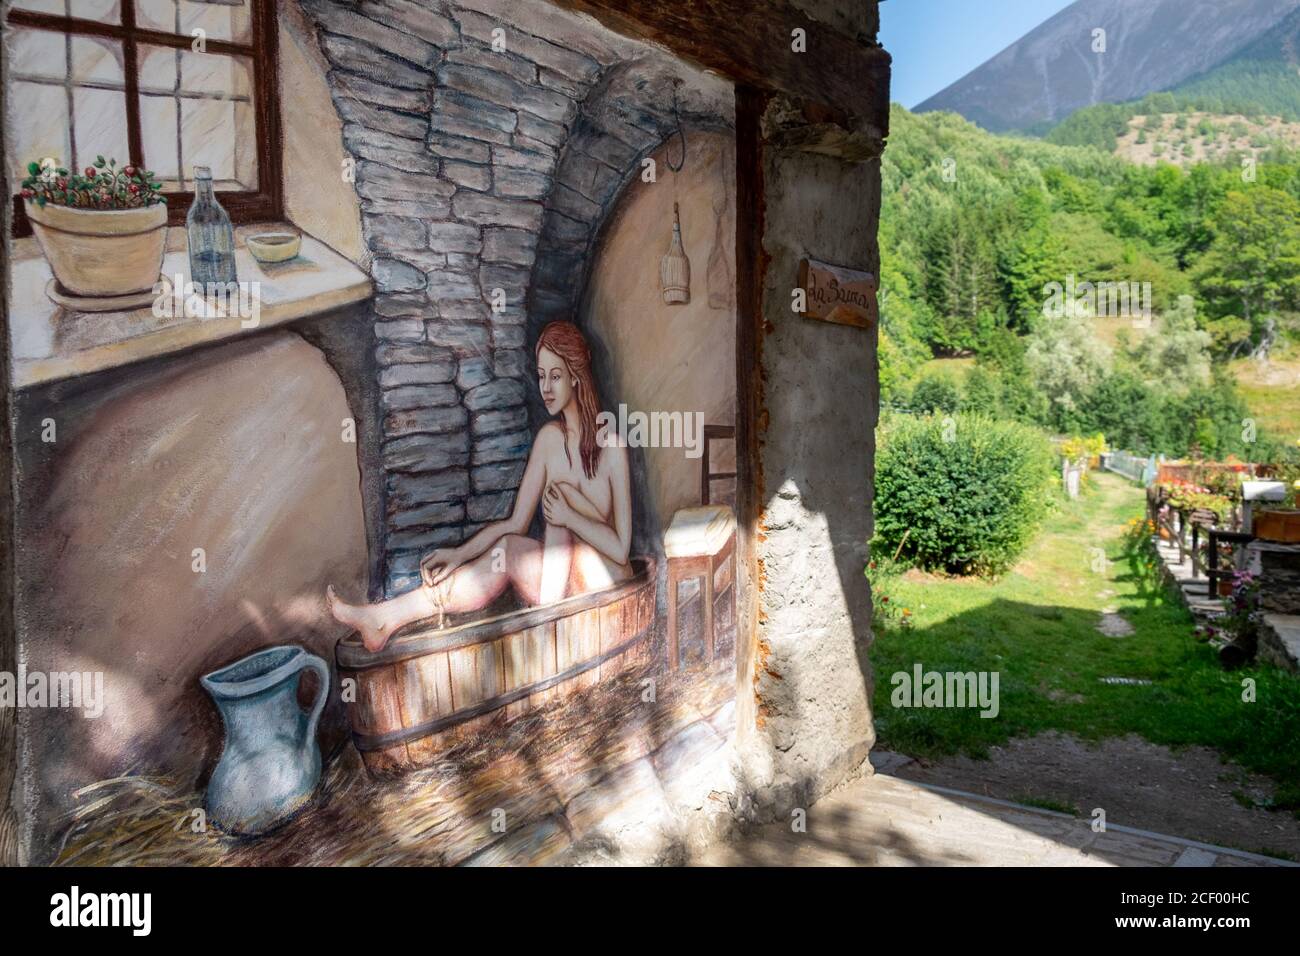 painted mural of a woman bathing in a bath tub in the small village of Usseaux, Piemonte,Italy Stock Photo